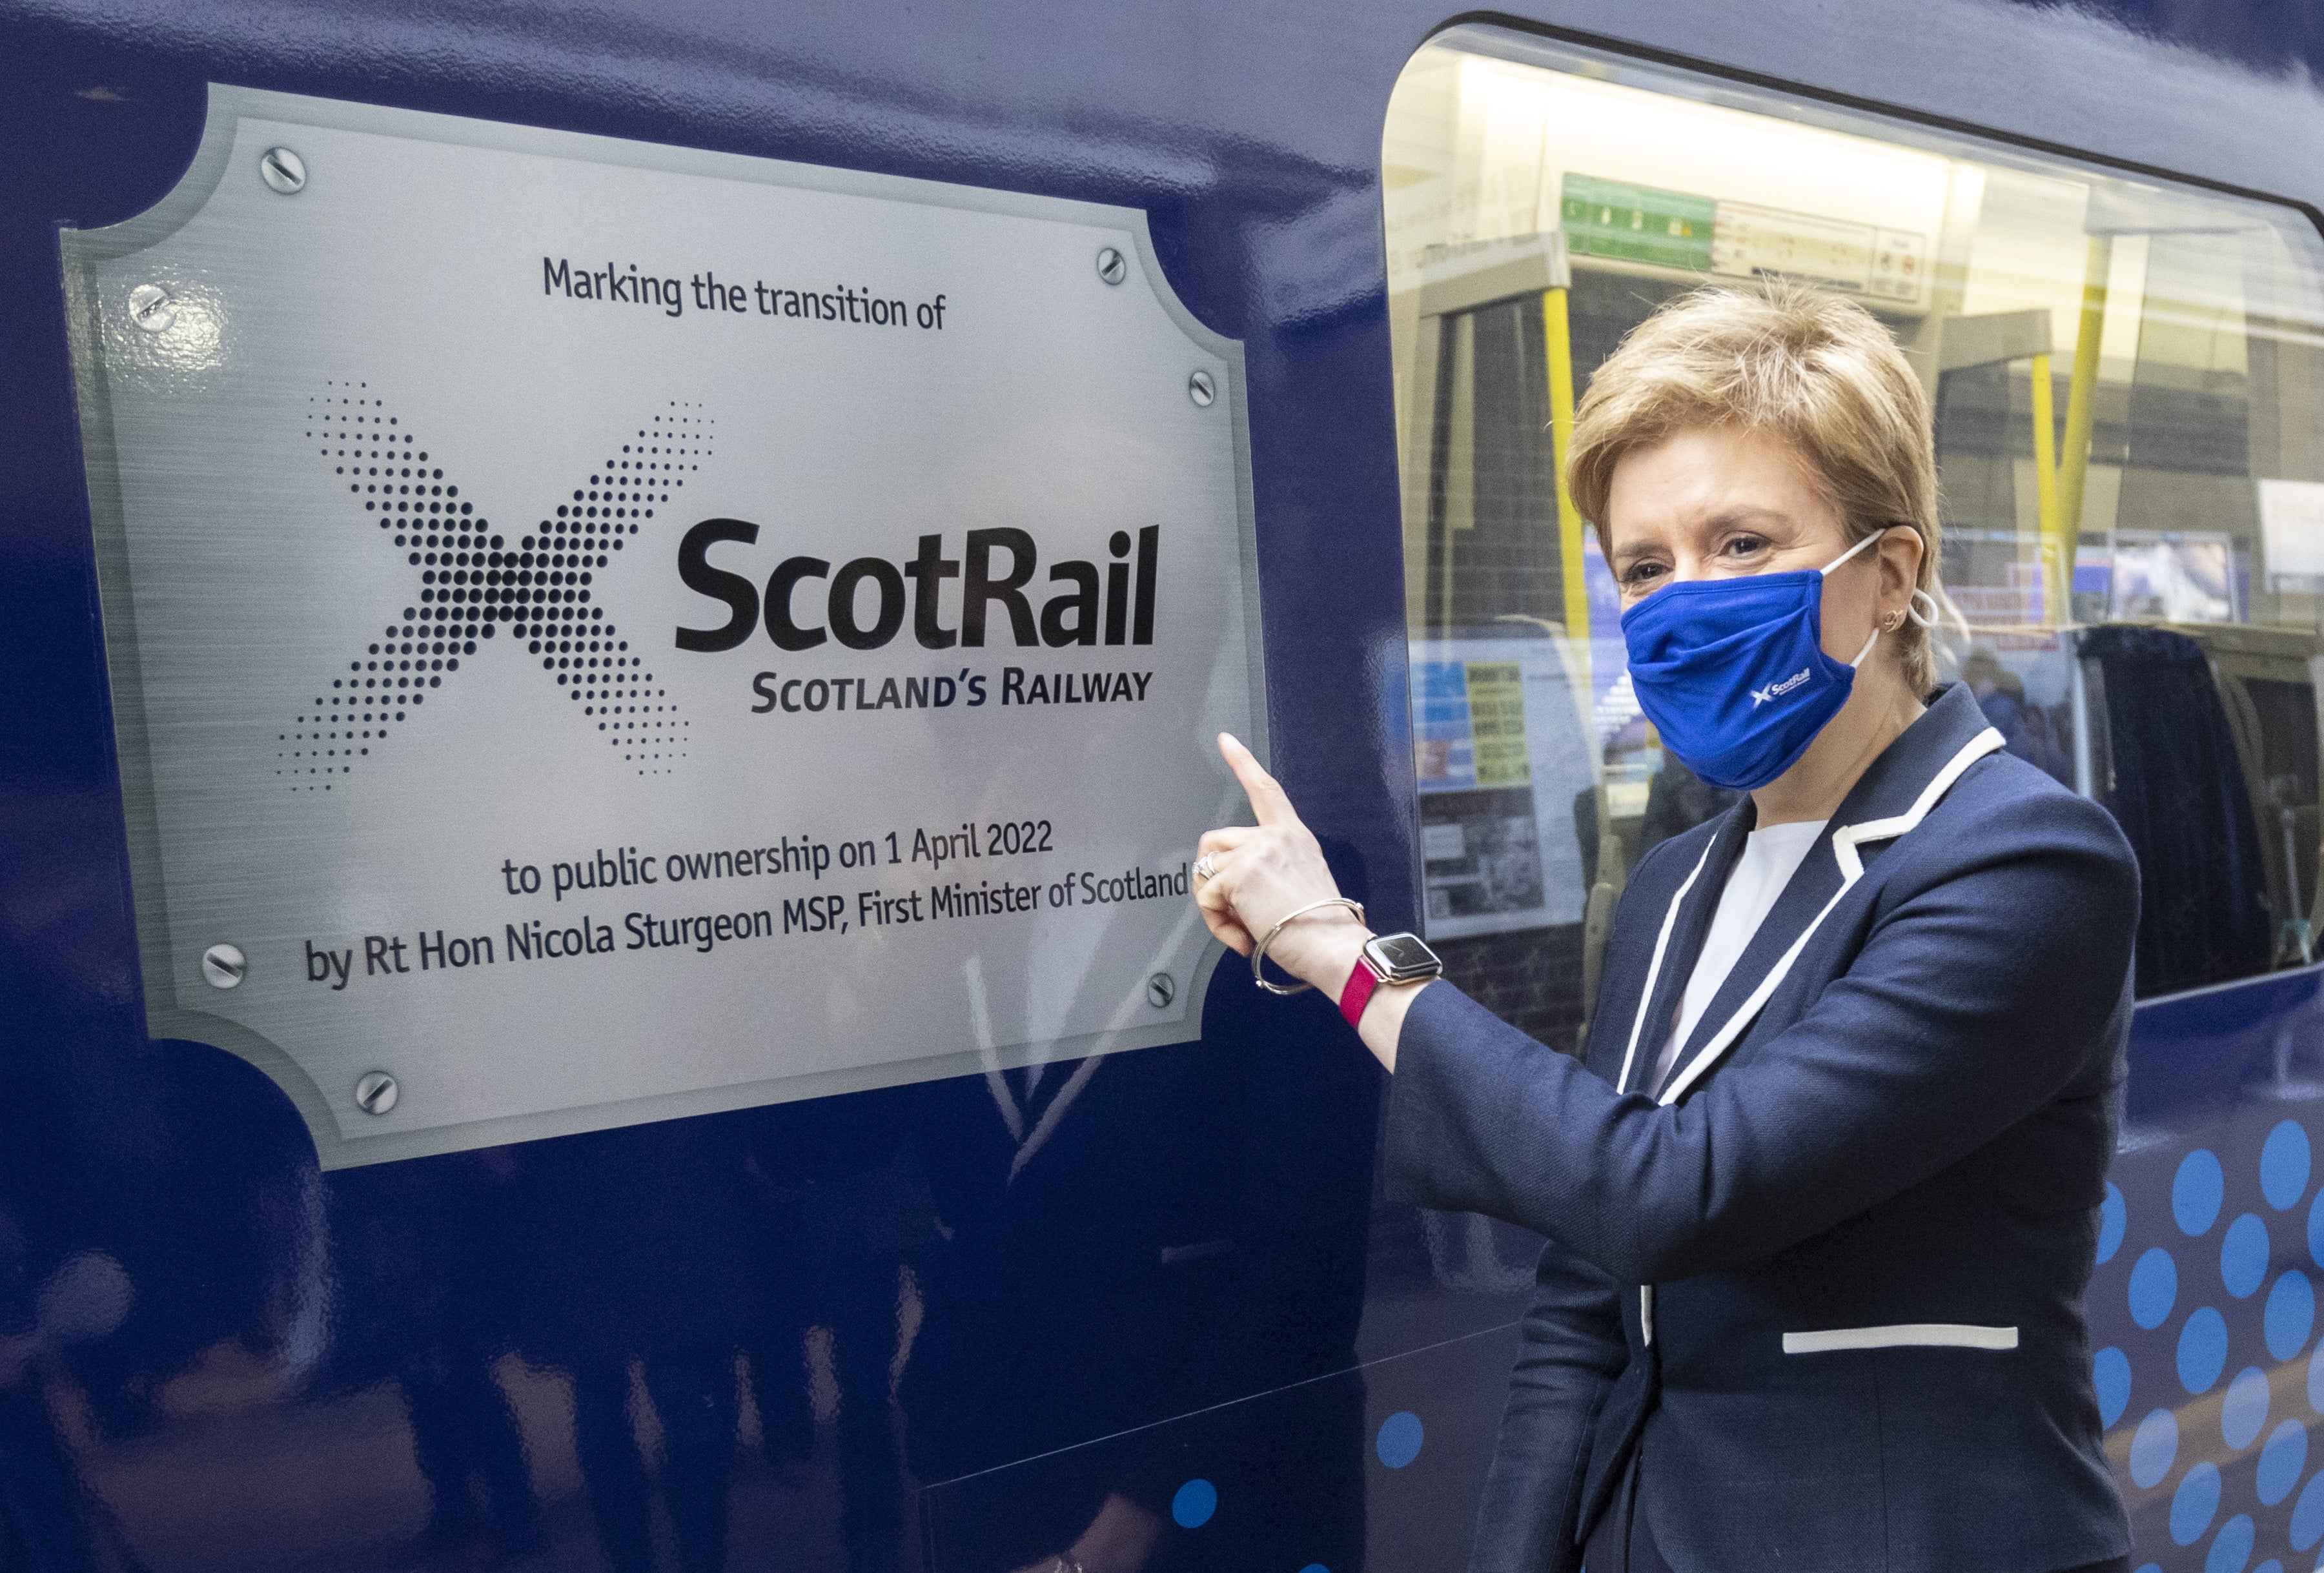 Nicola Sturgeon was speaking at Glasgow Queen Street on the day ScotRail became publicly owned (Robert Perry/PA)